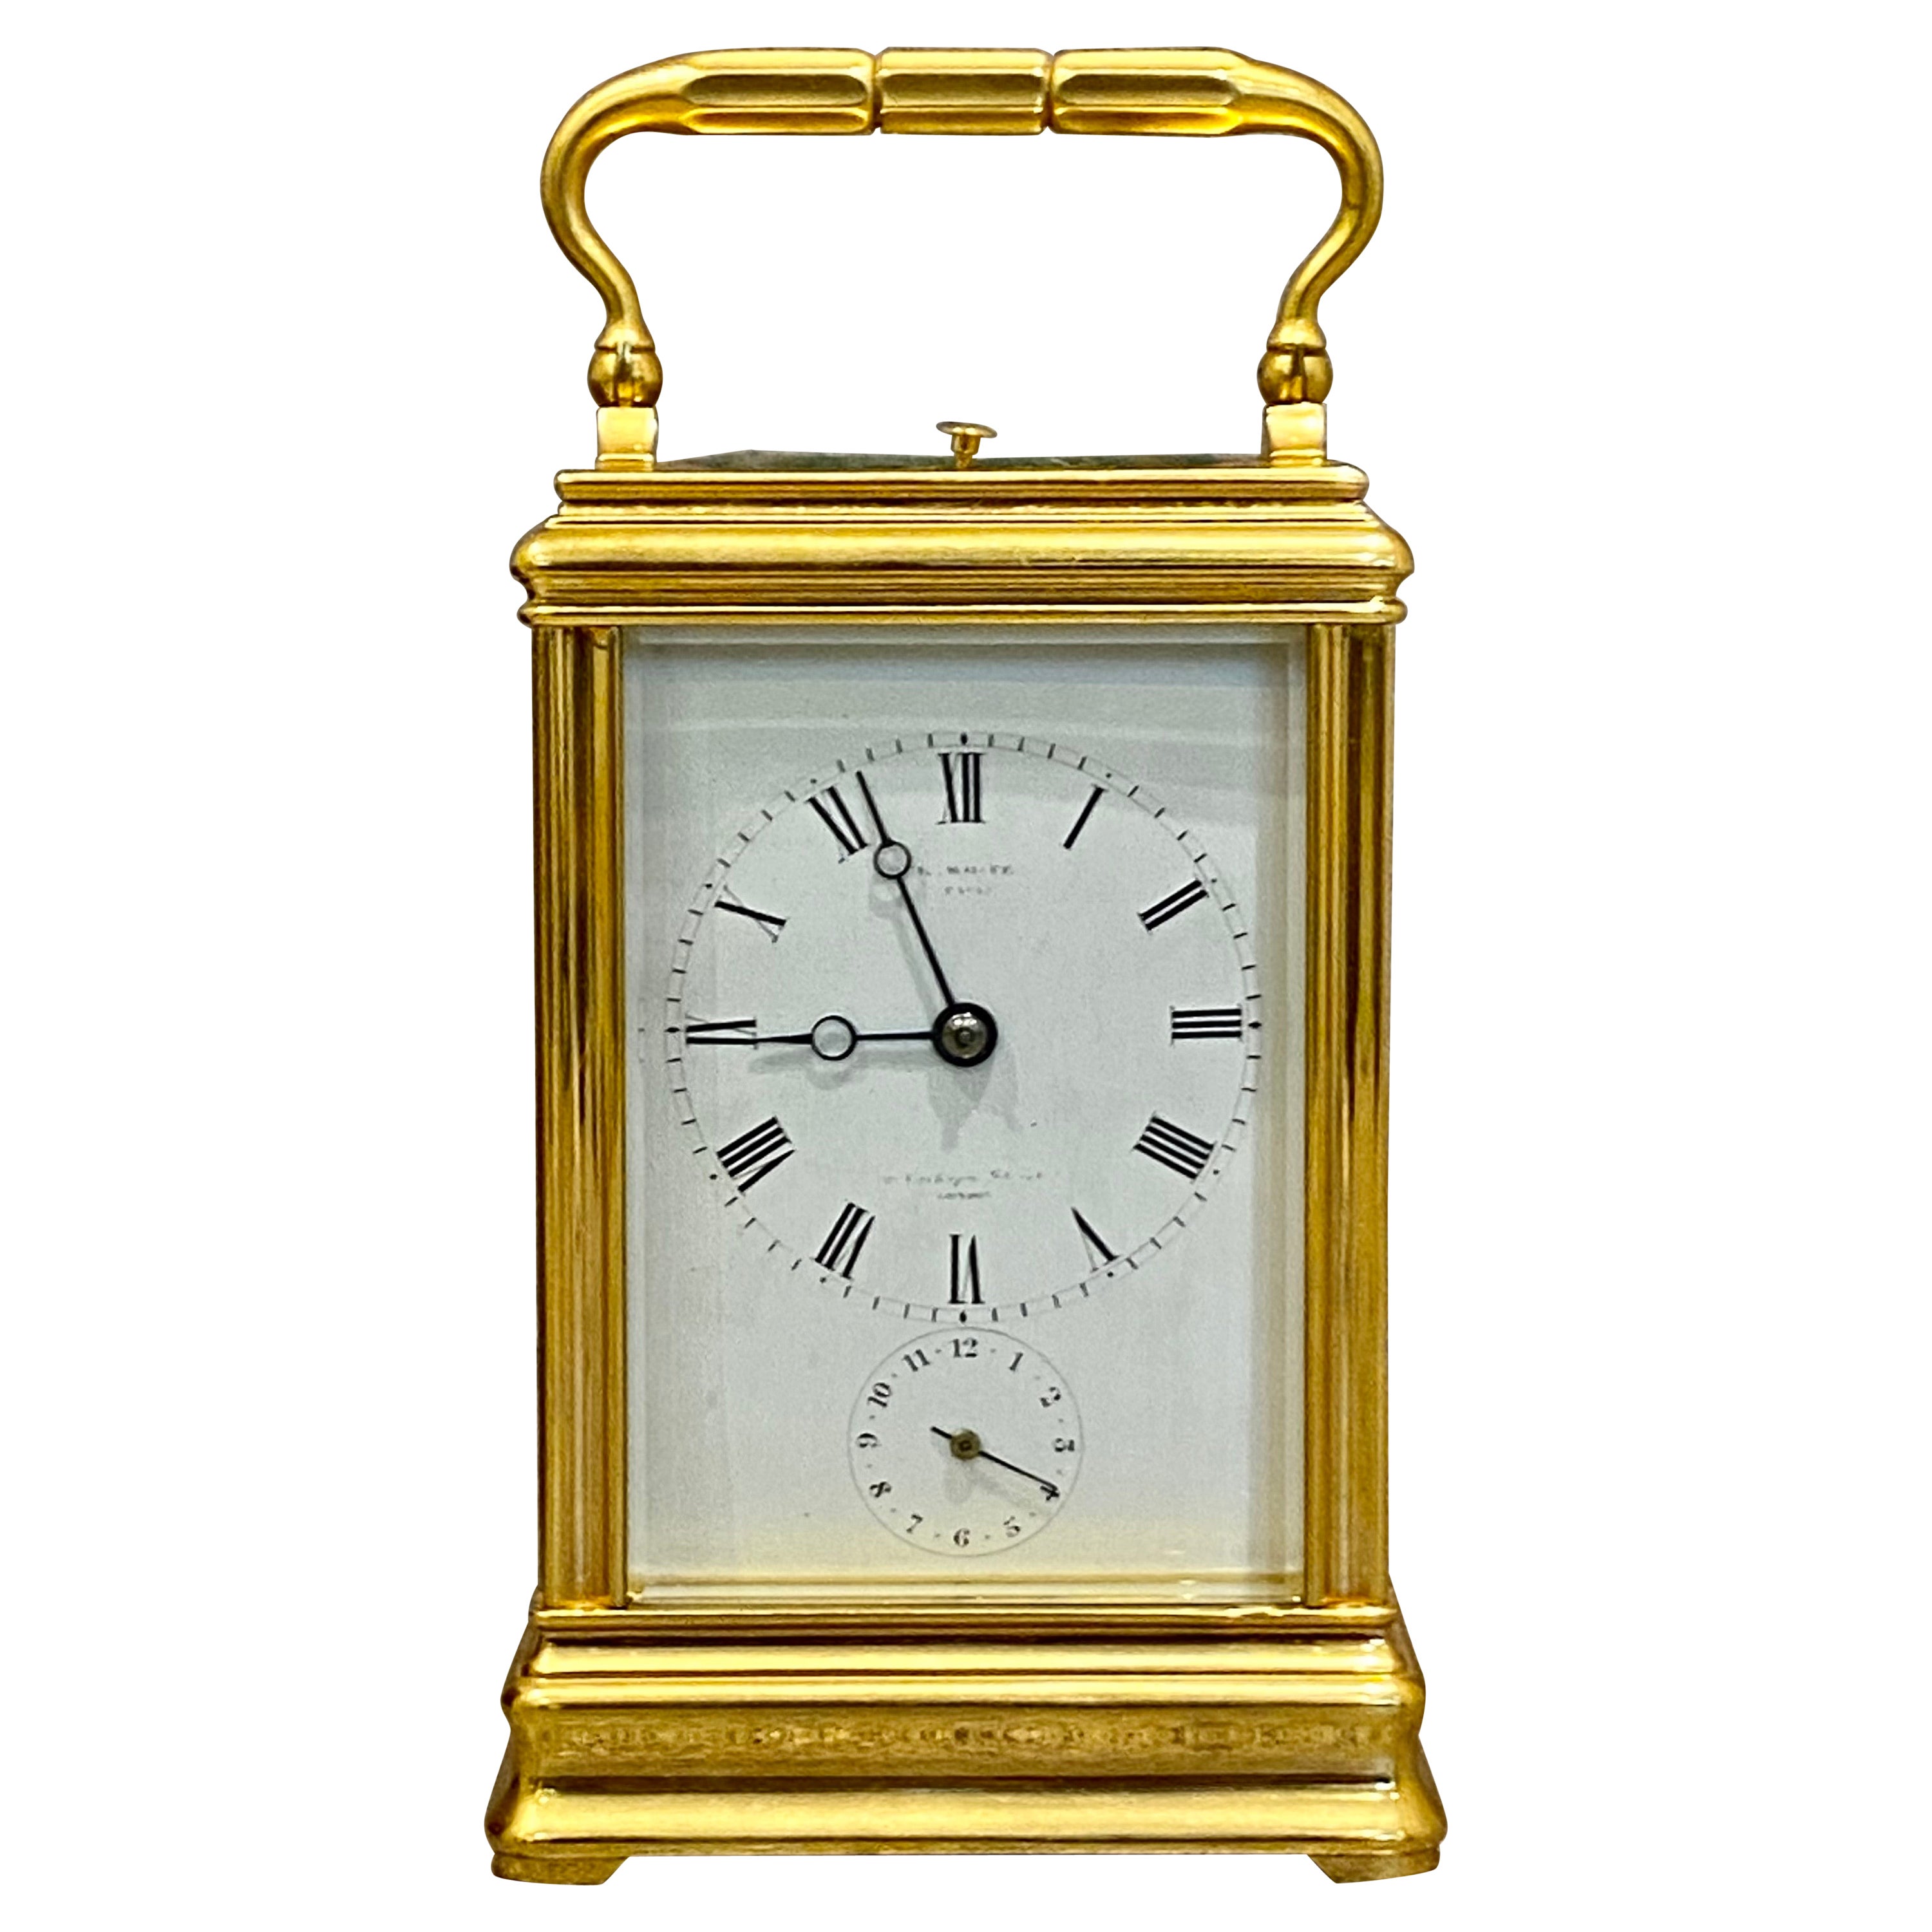 Strike Repeat Alarm Carriage Clock by Drocourt for E. White